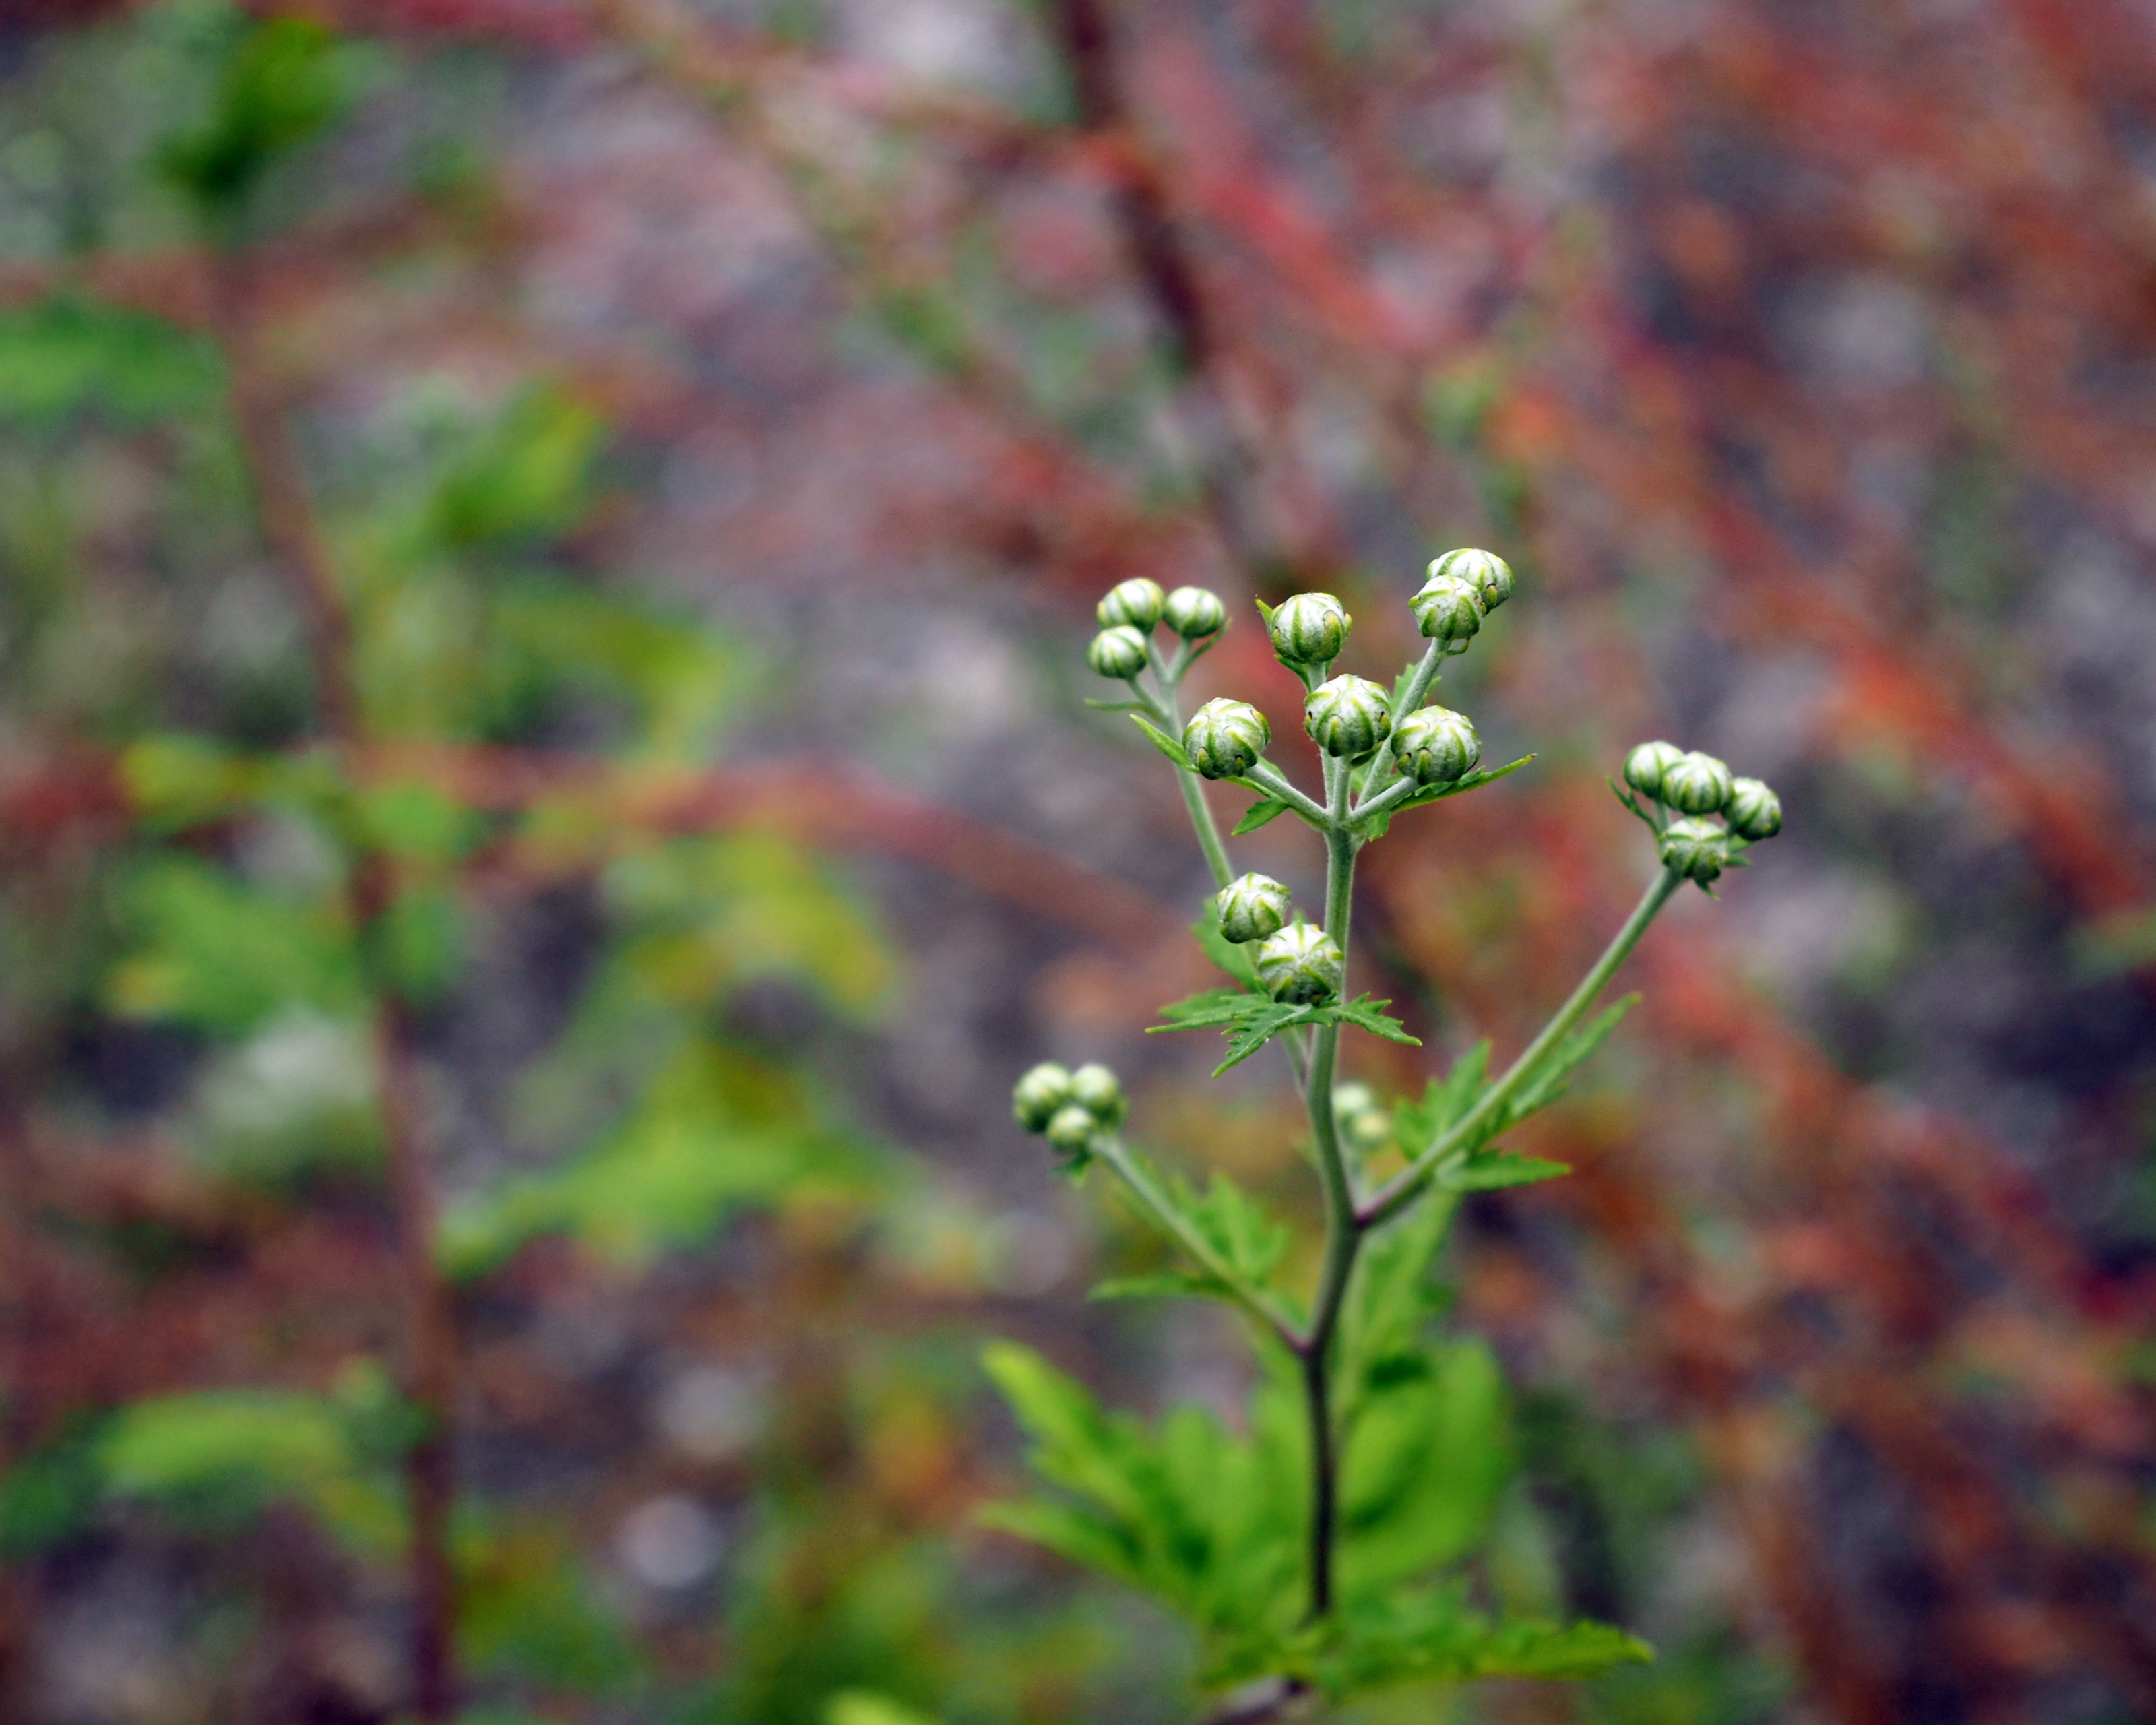 plant buds in front of red and greeen twigs